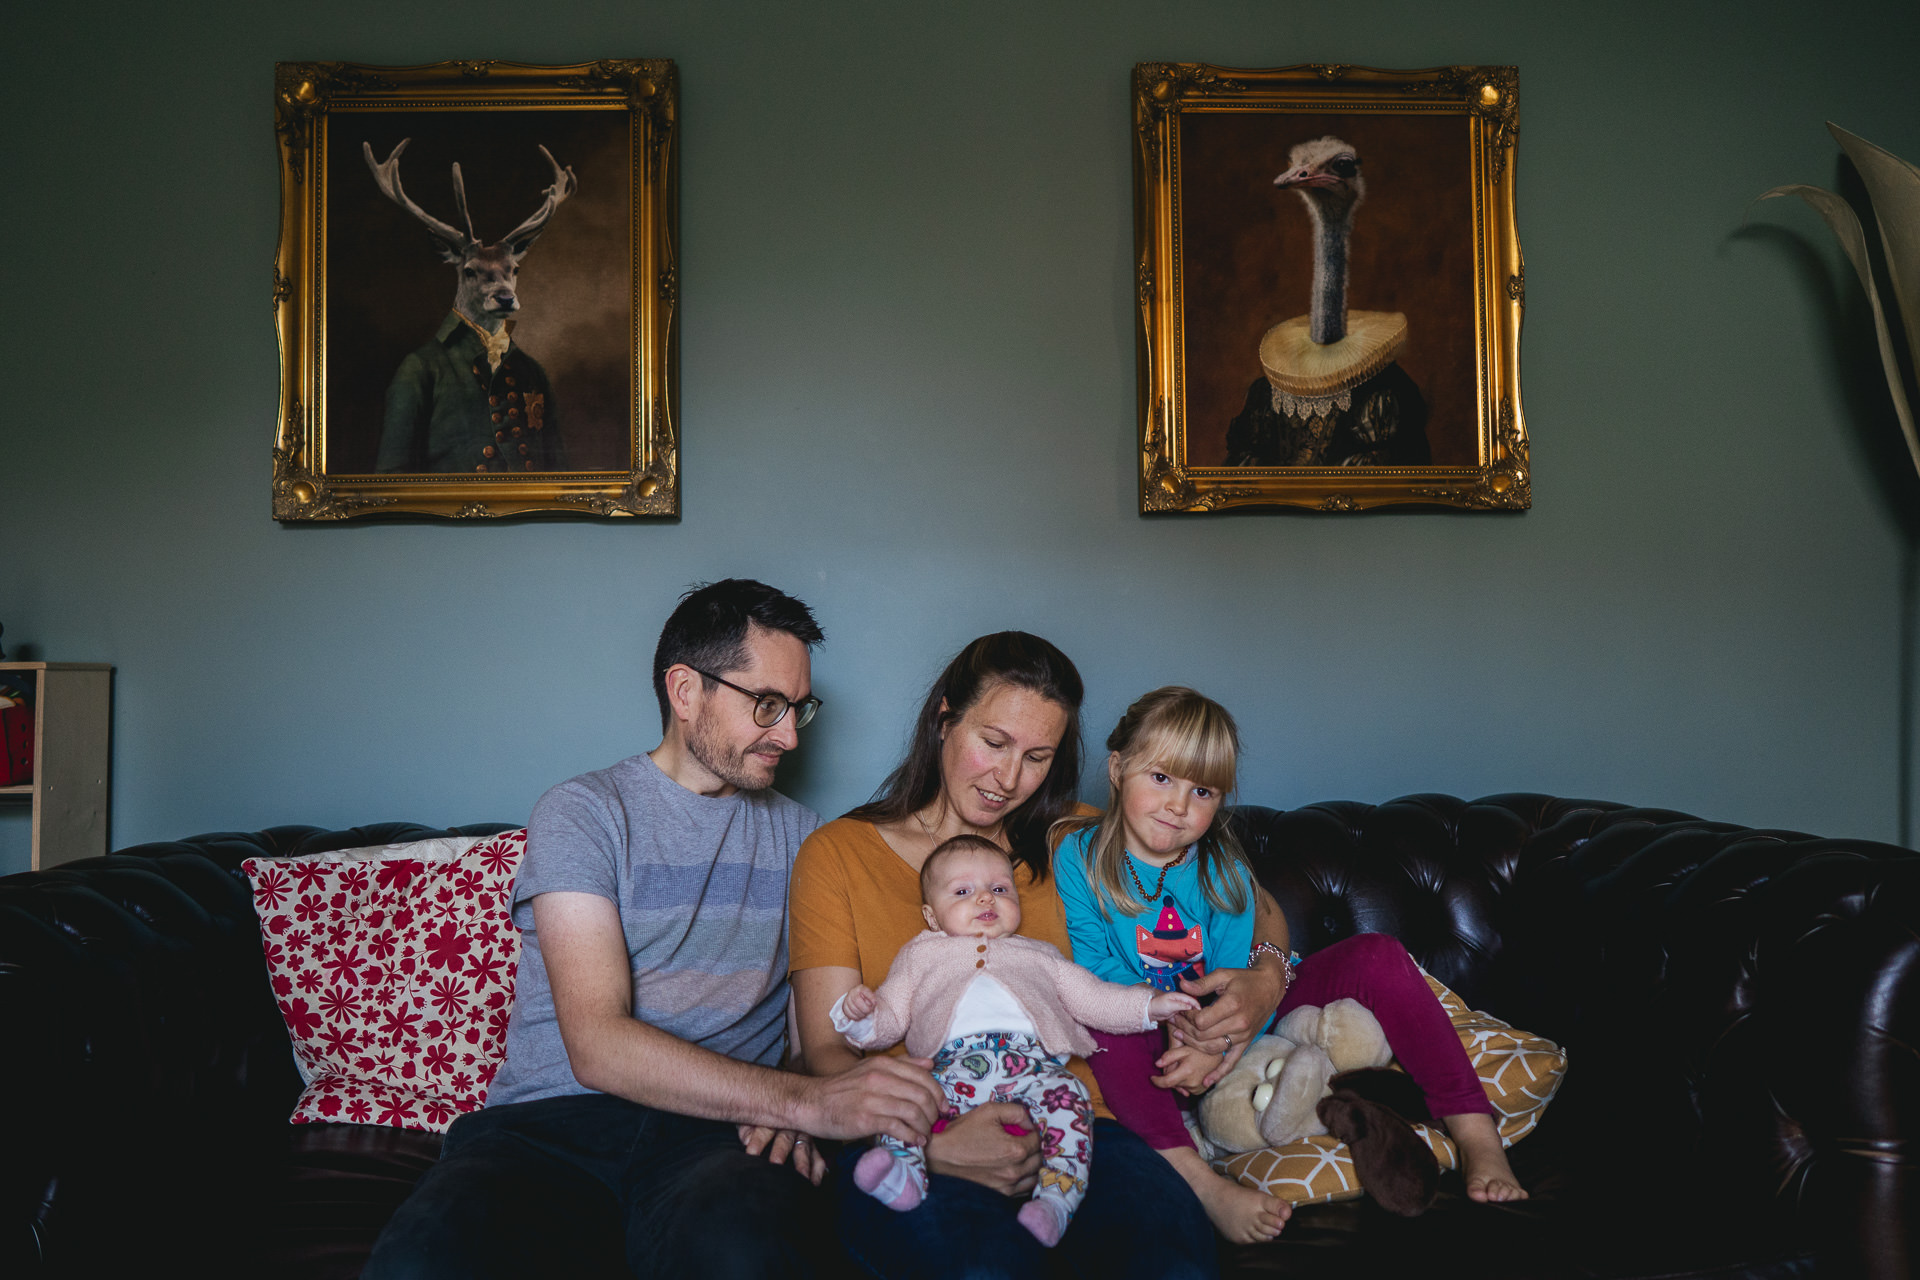 Exeter family photography: a family sitting together on a sofa with pictures hanging above